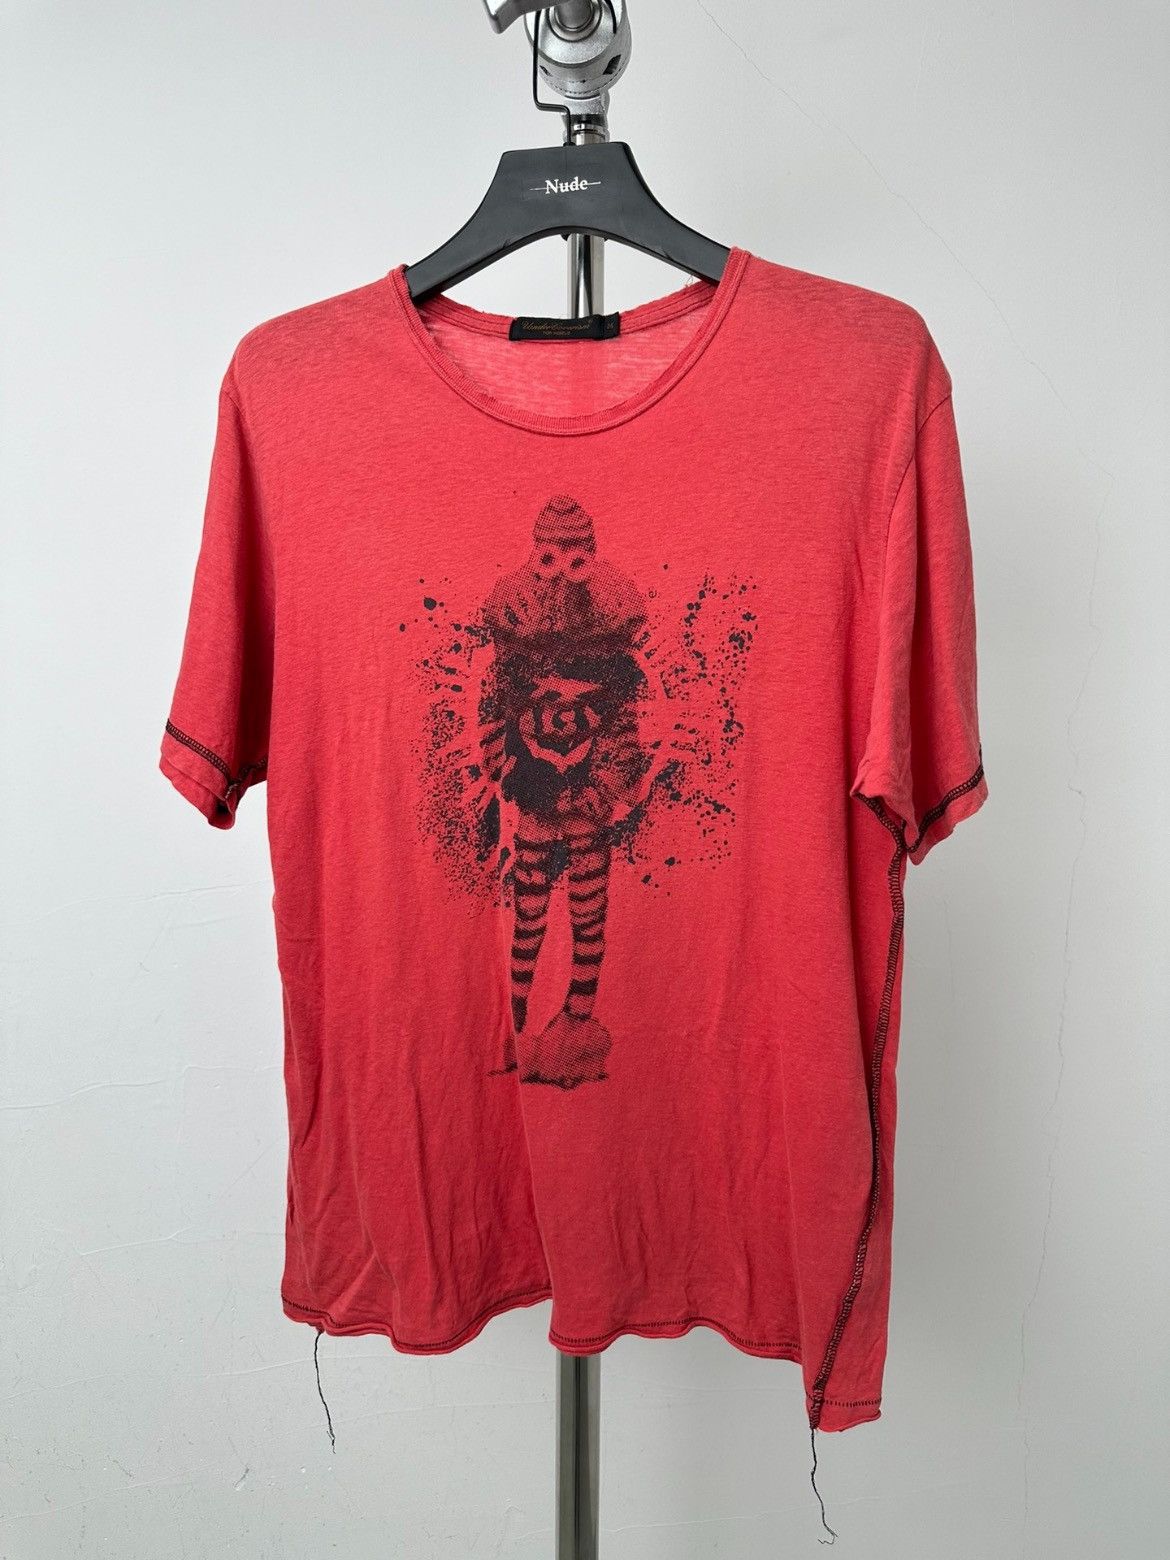 Undercover Undercover 03ss SCAB joker print distressed tee | Grailed